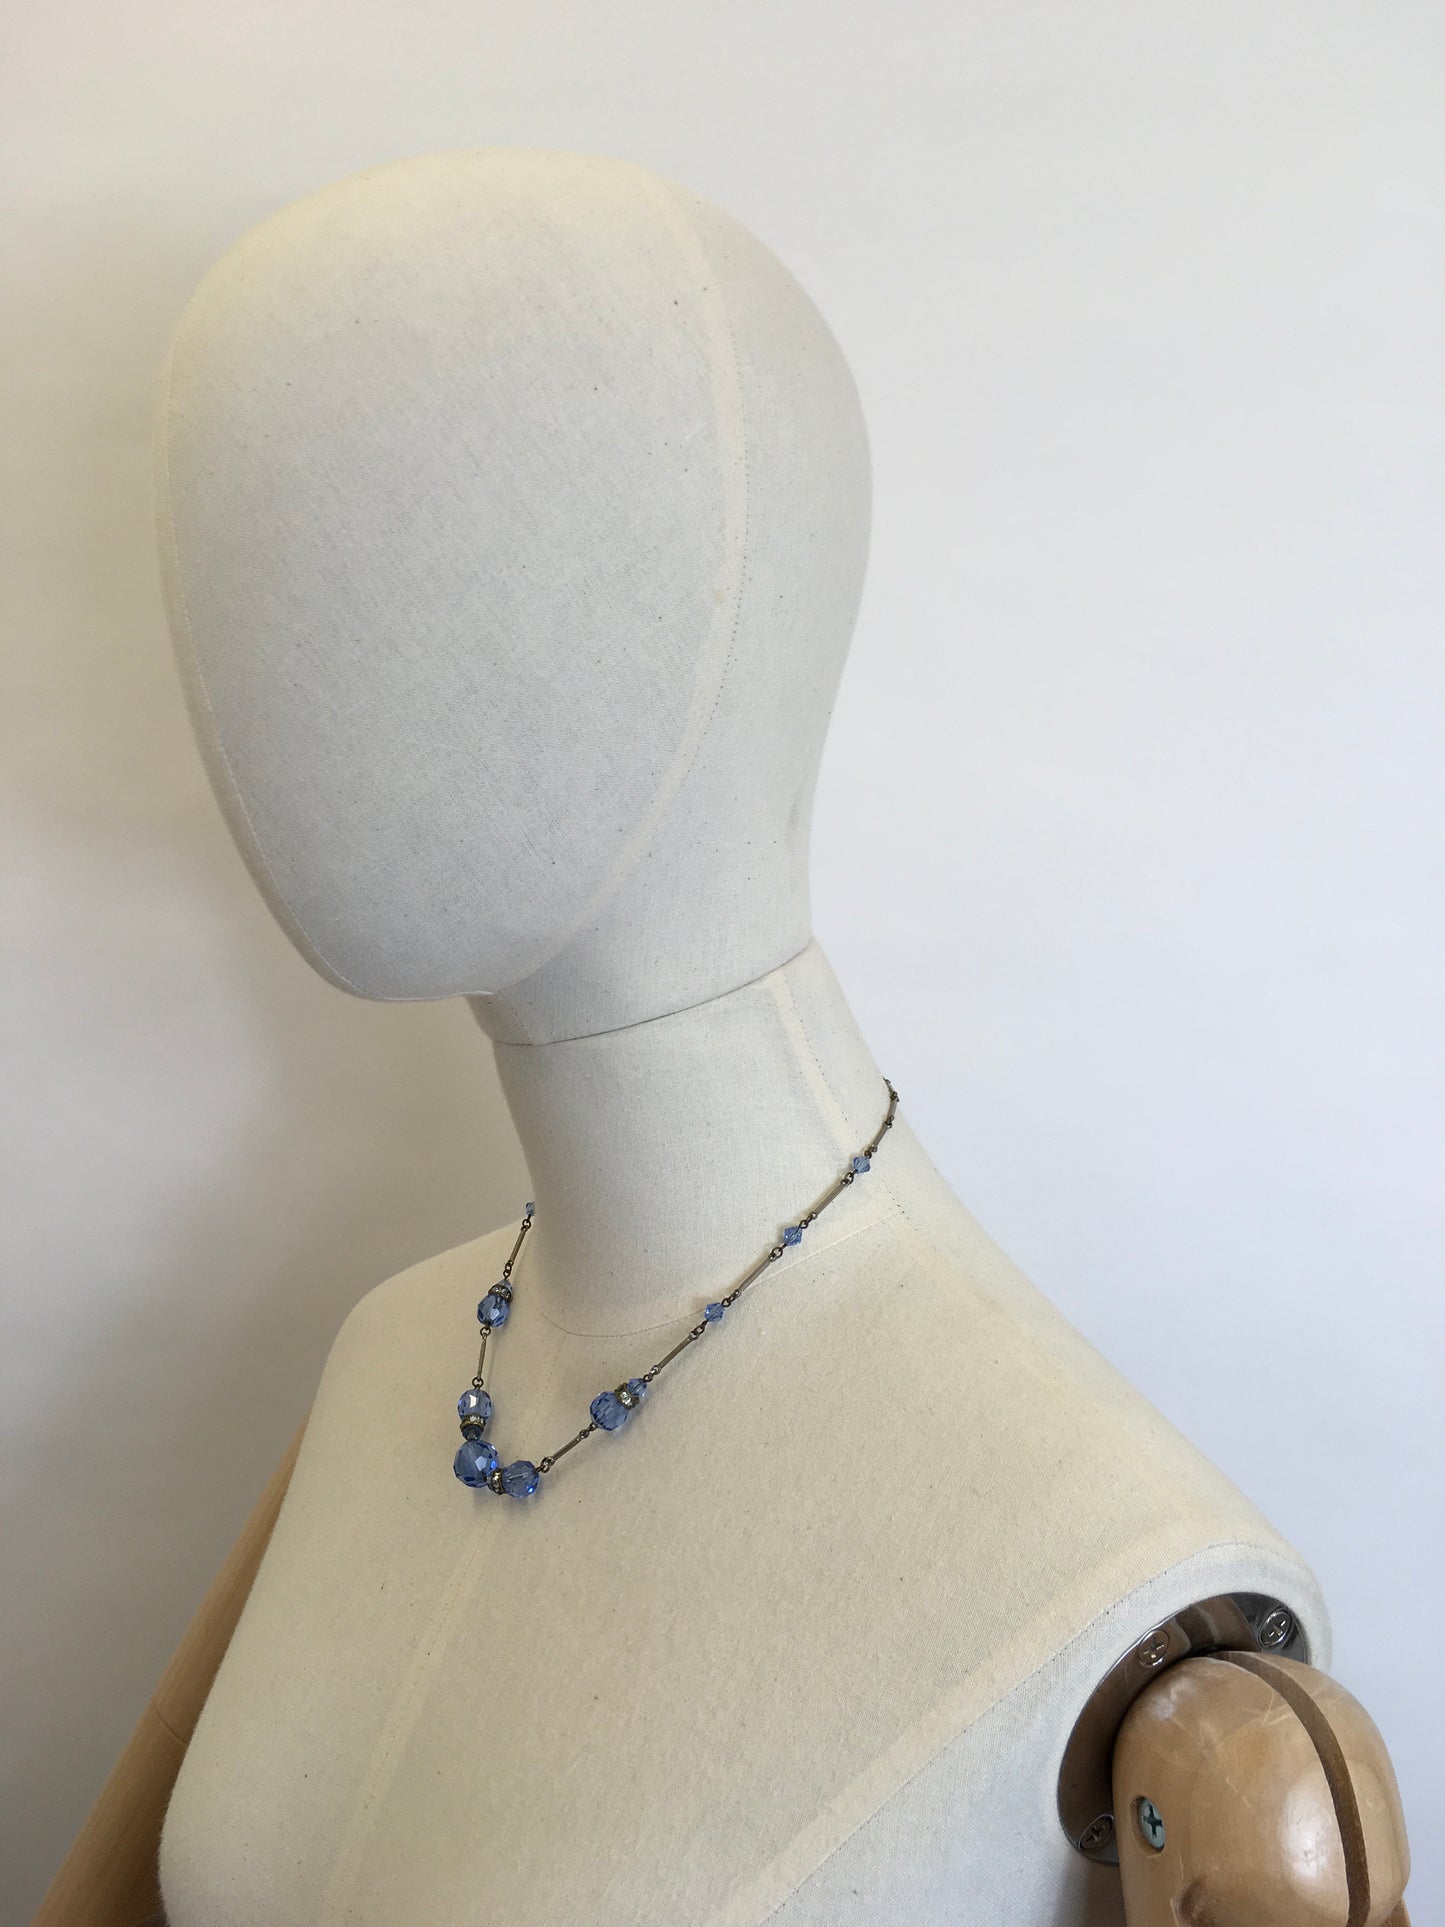 Original 1930’s Necklace - With Royal Blue Glass Beads